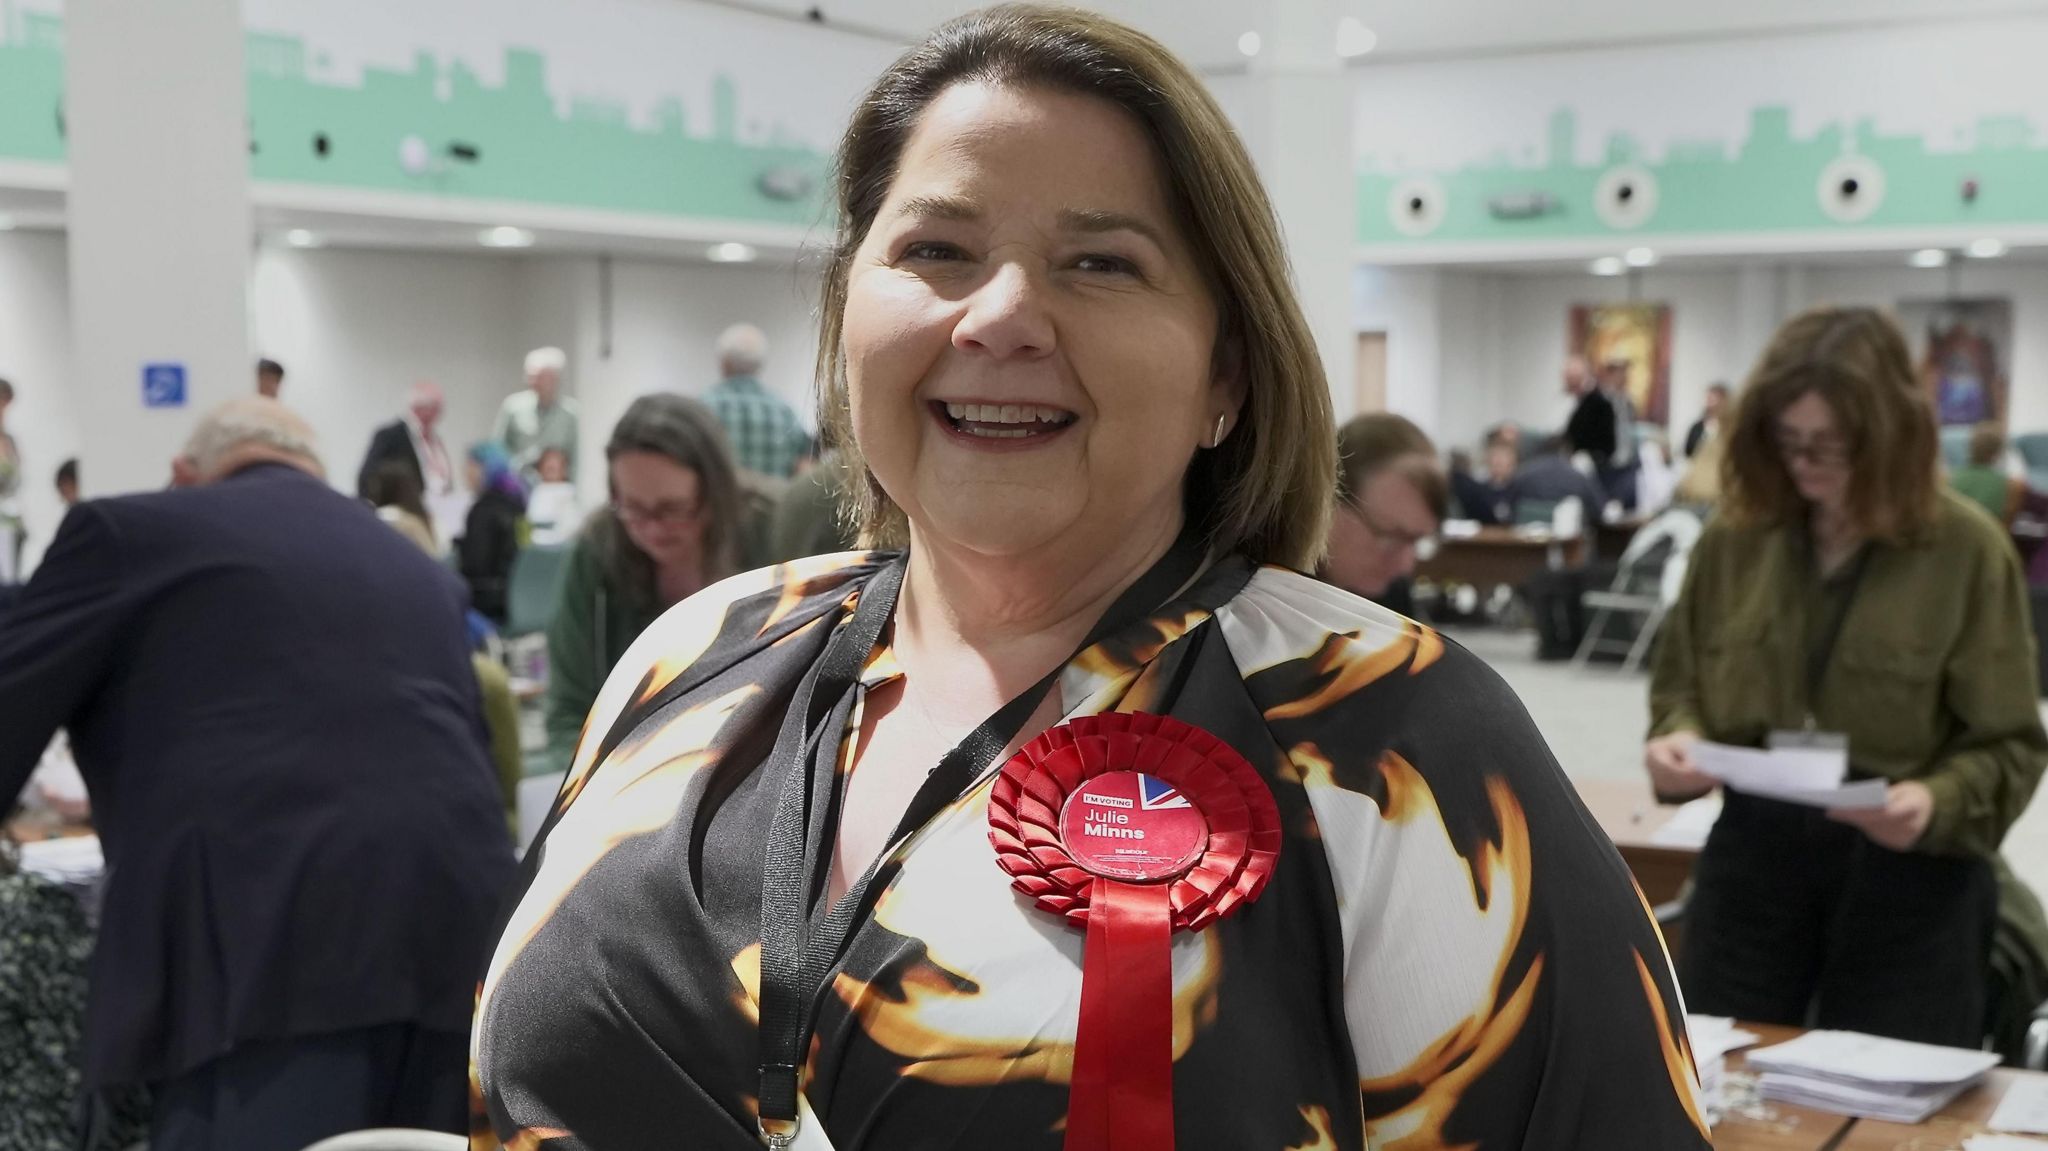 Winning Labour candidate Julie Minns wearing a red rosette smiles at the camera